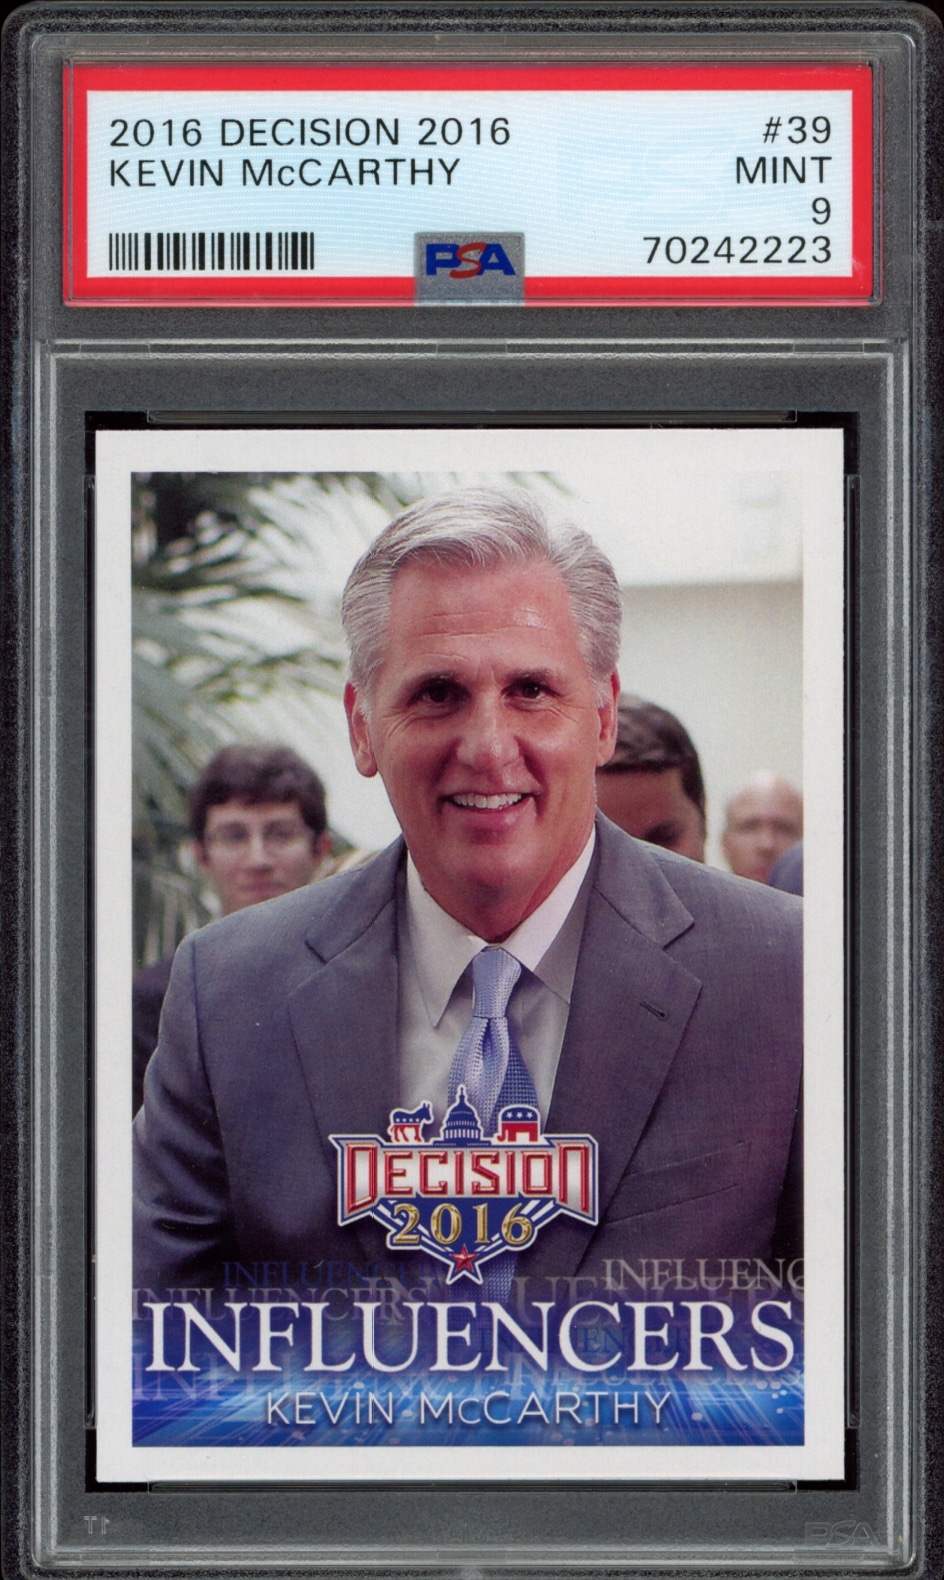 Kevin McCarthy Influencers card from 2016 Leaf Decision series, graded MINT 9 by PSA.